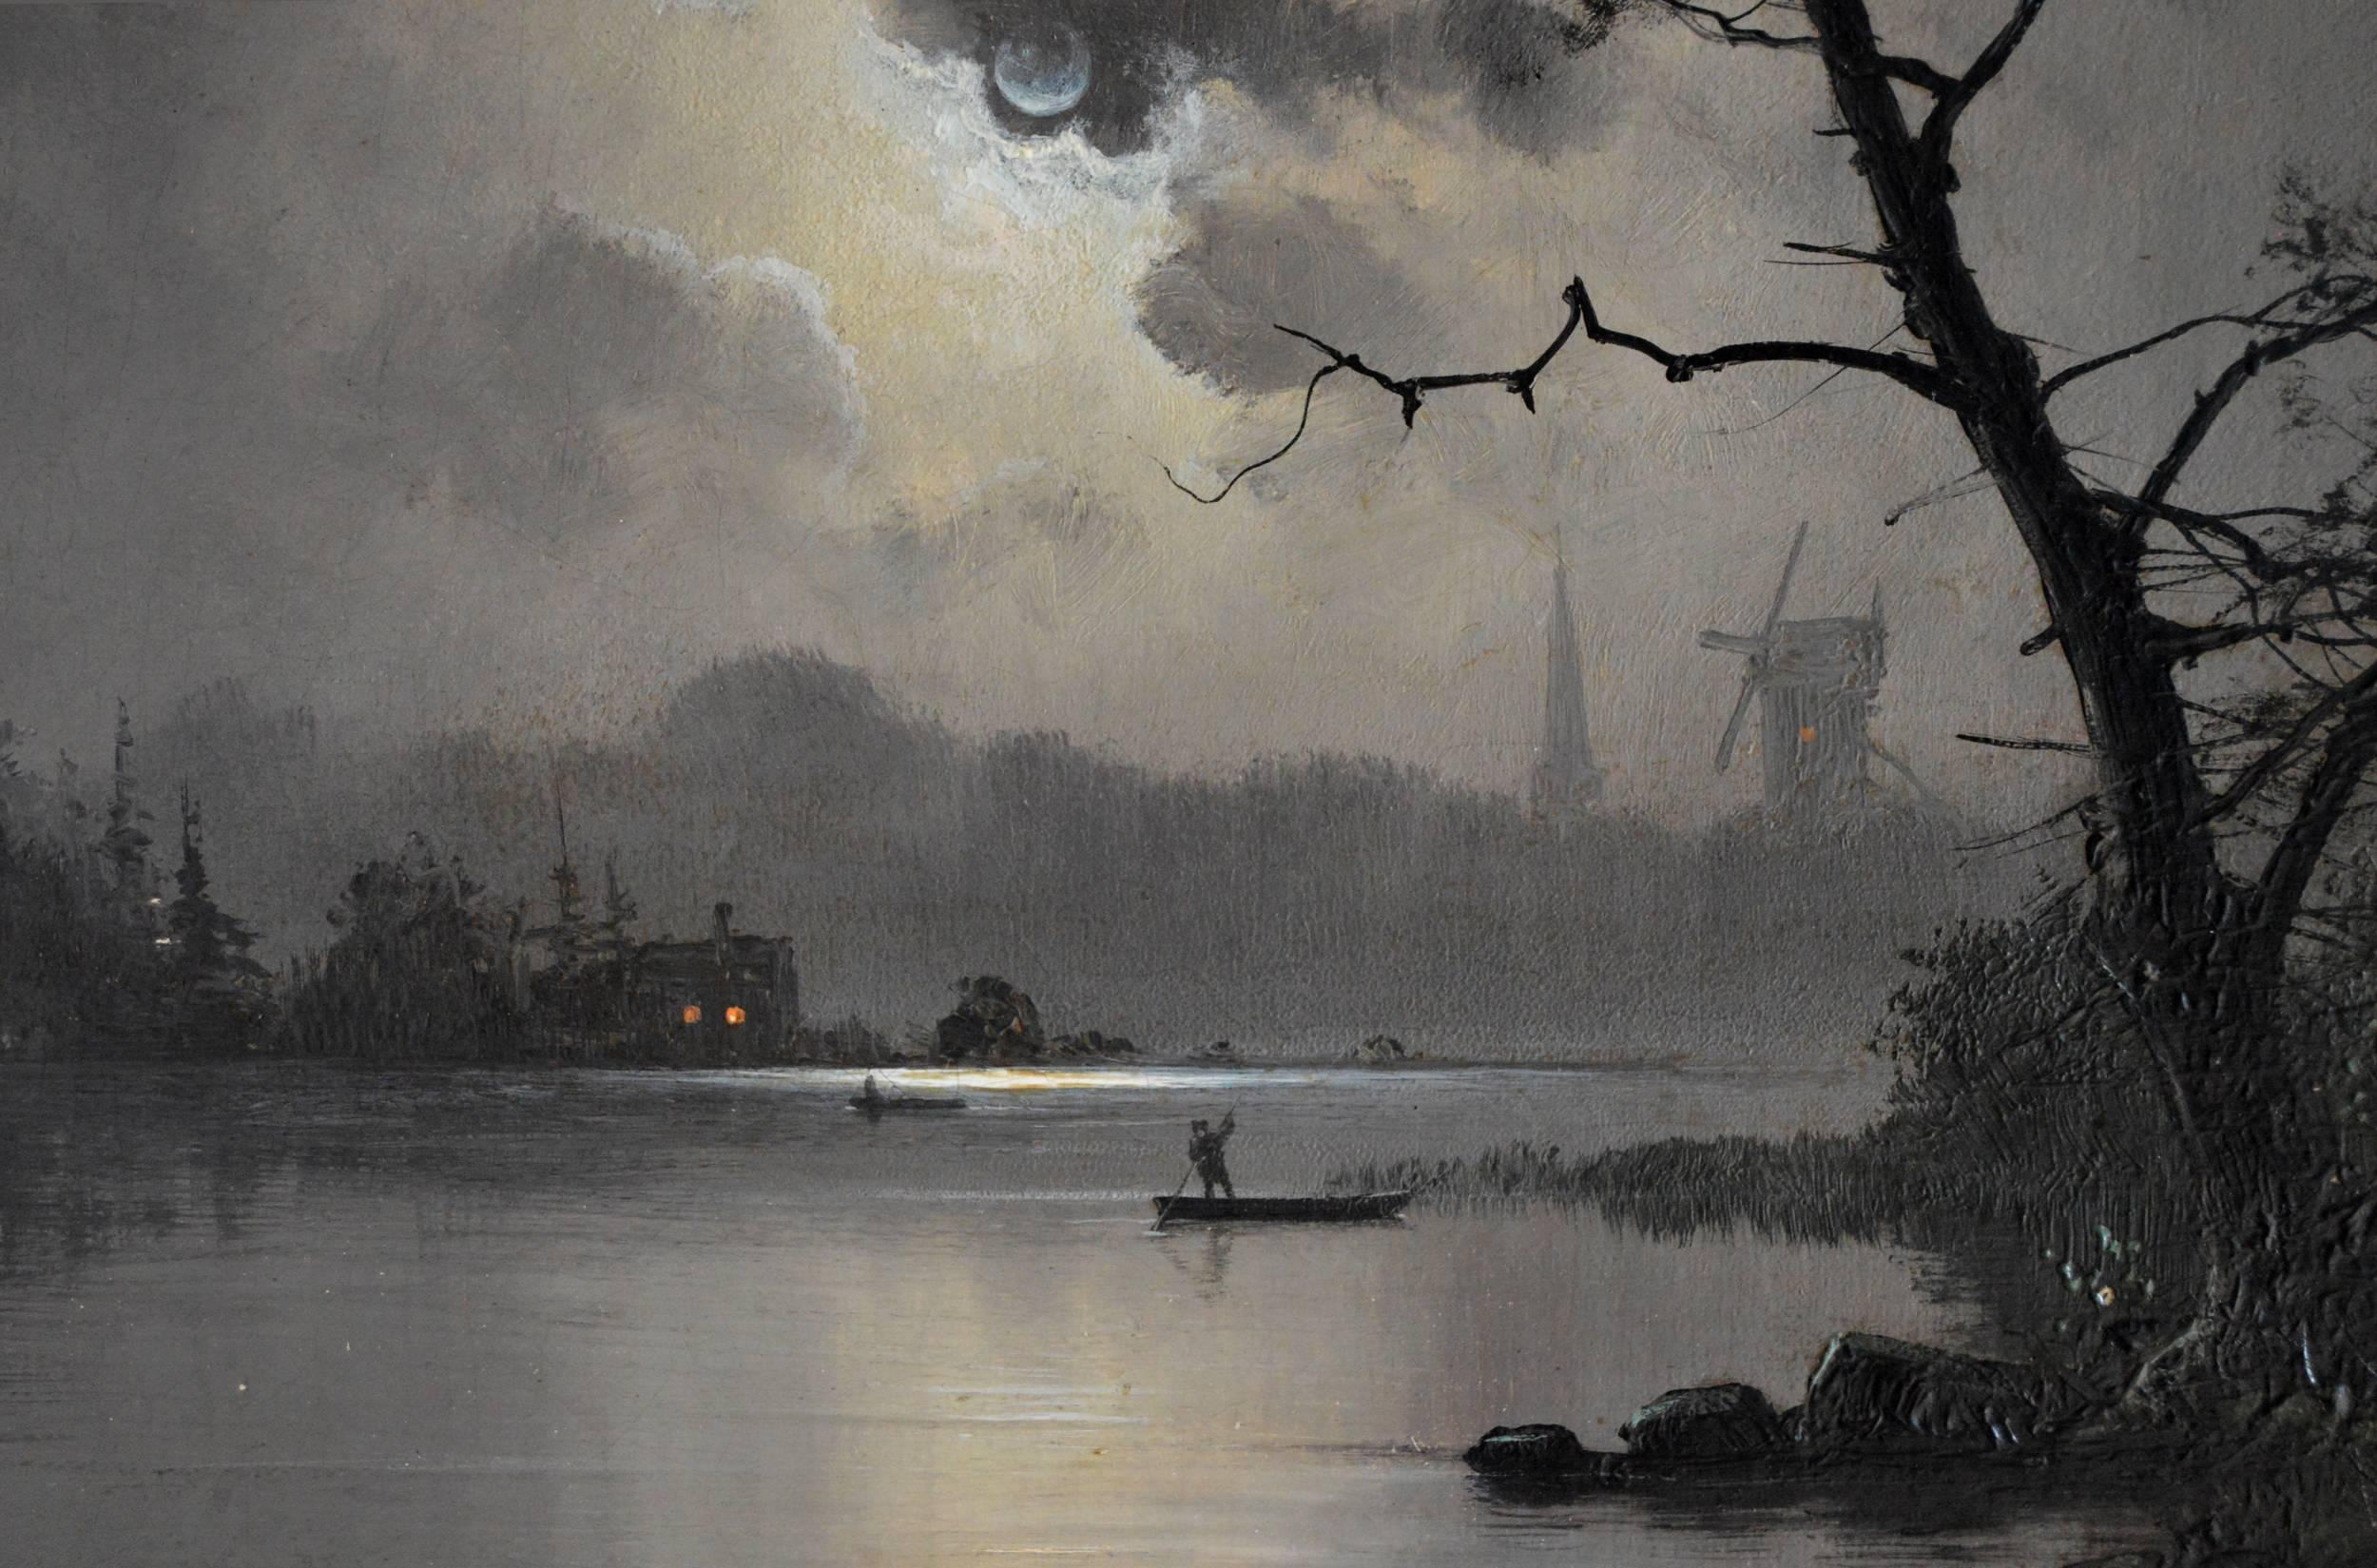 Fishing by Moonlight, oil on canvas - Painting by Nils Hans Christiansen